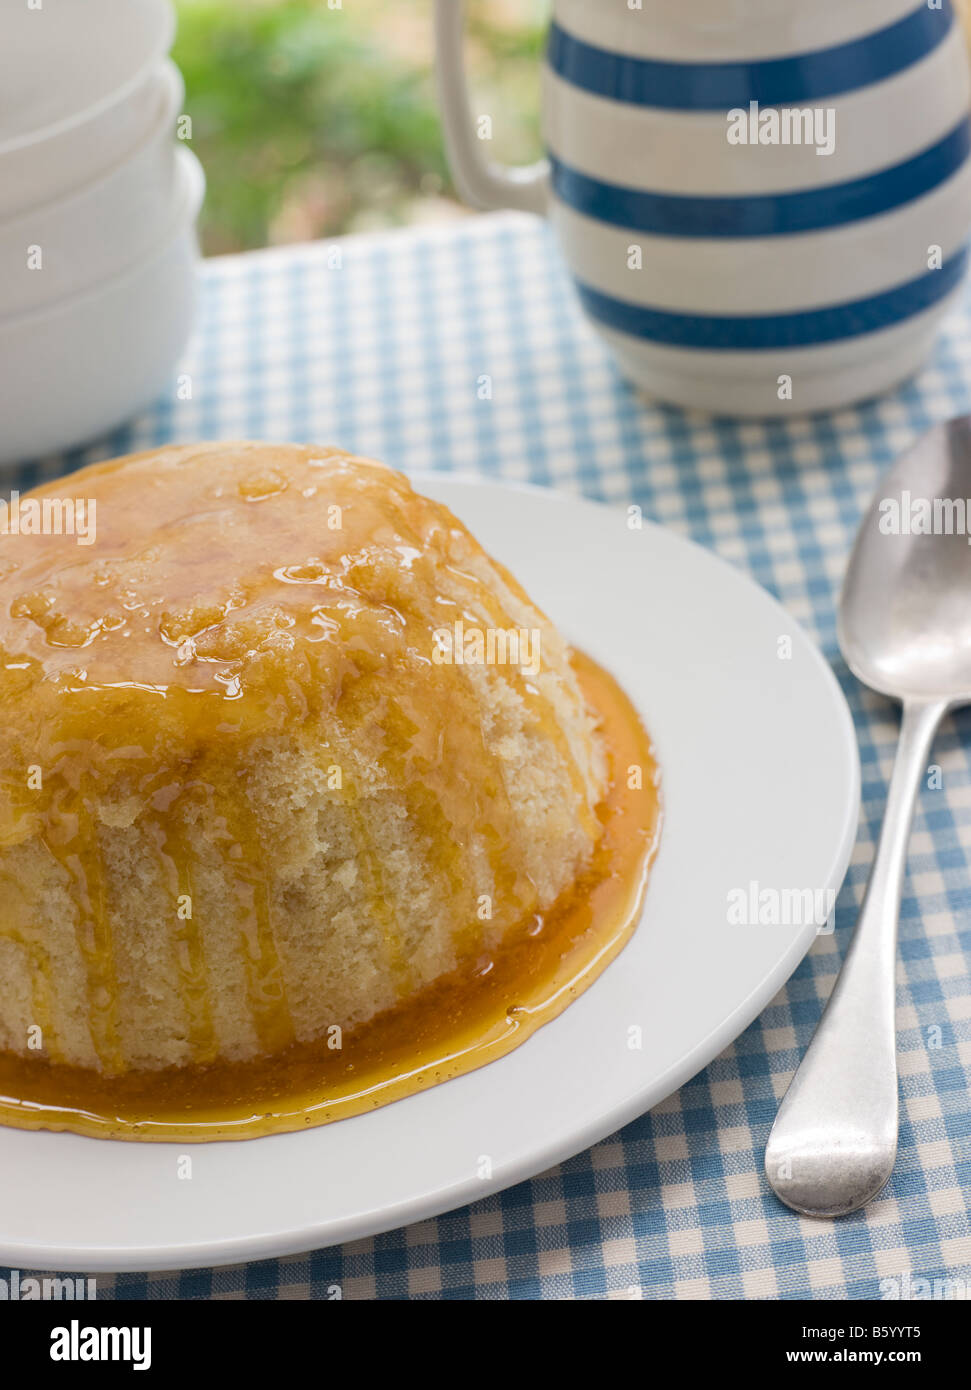 Steamed Syrup Sponge with a jug of Custard Stock Photo